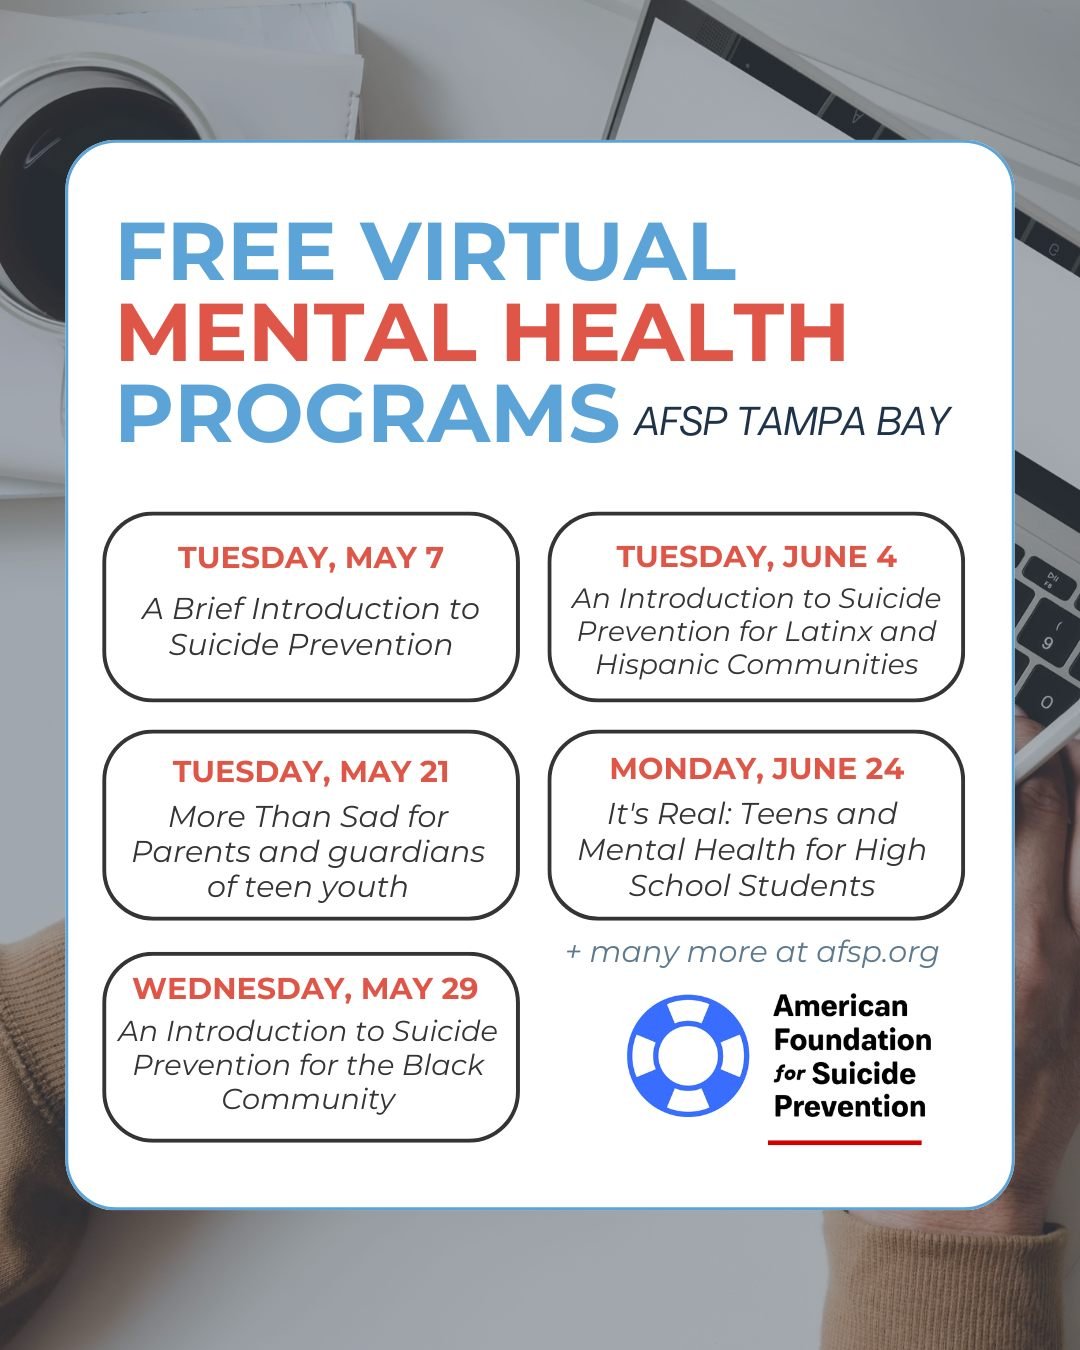 Virtually learn more about mental health and suicide prevention for free with the American Foundation for Suicide Prevention (AFSP) Tampa Bay! From now until September, AFSP Tampa Bay will host a series of virtual presentations that delve into crucia